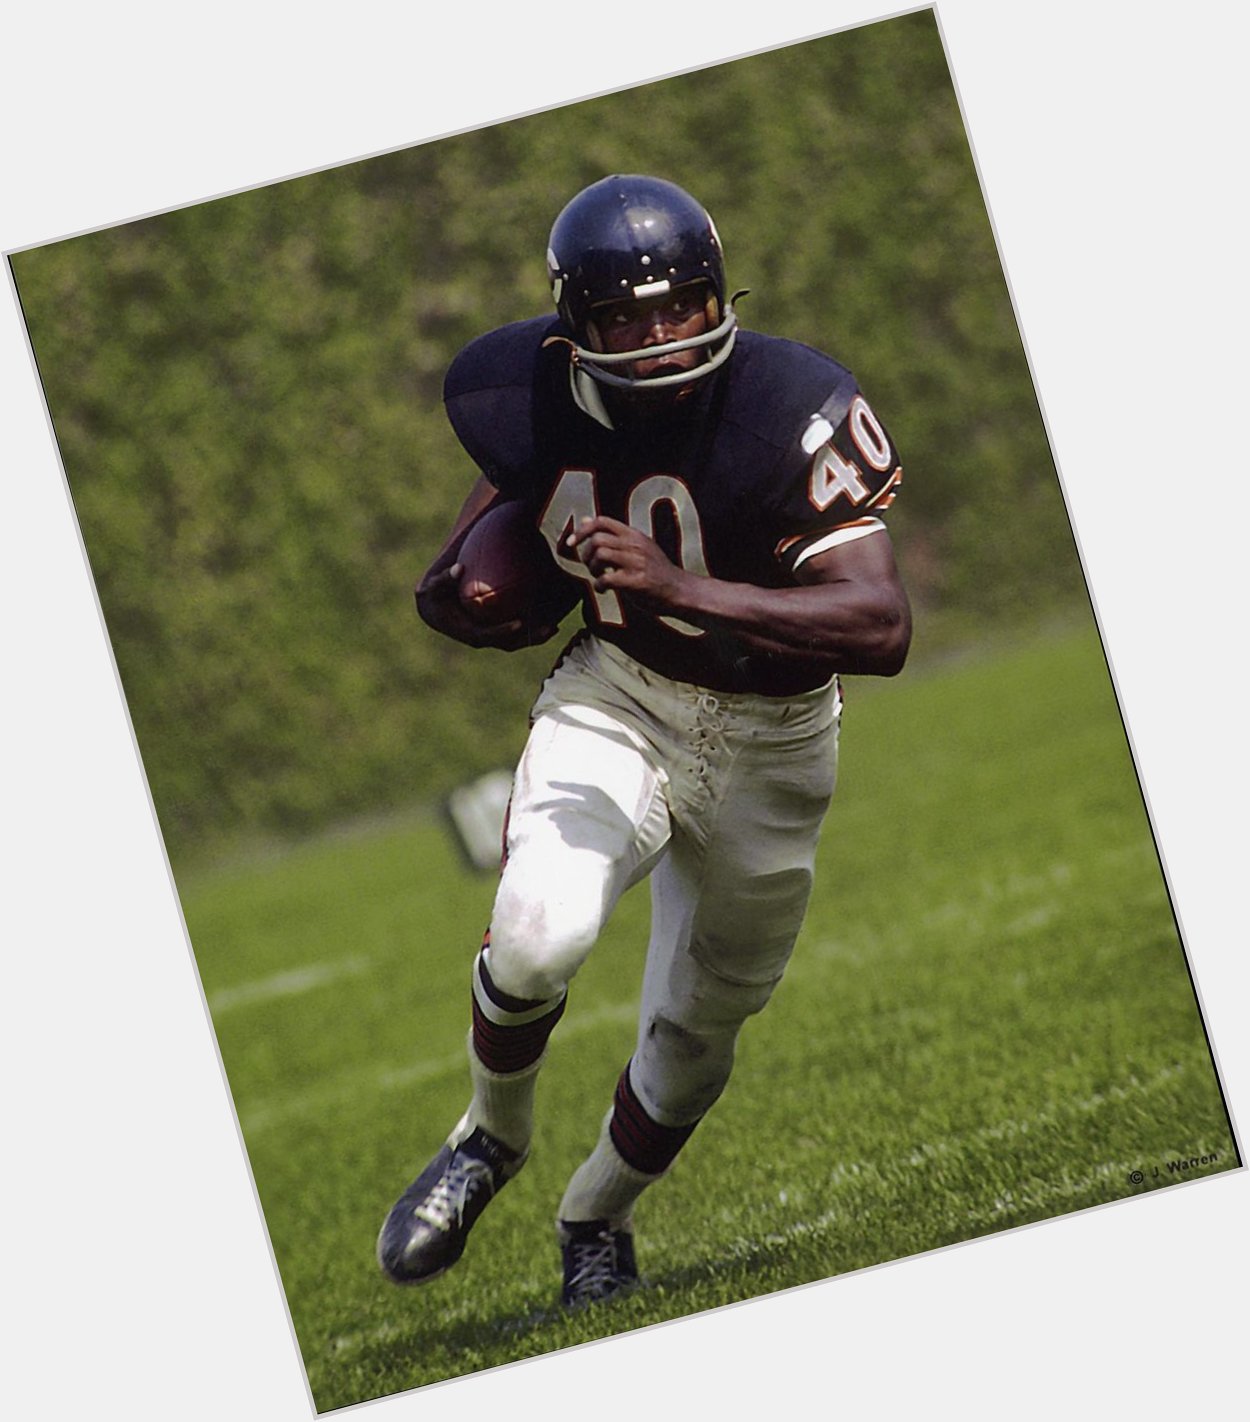 A very happy birthday to the \"Kansas Comet\", HOFer Gale Sayers!!! 